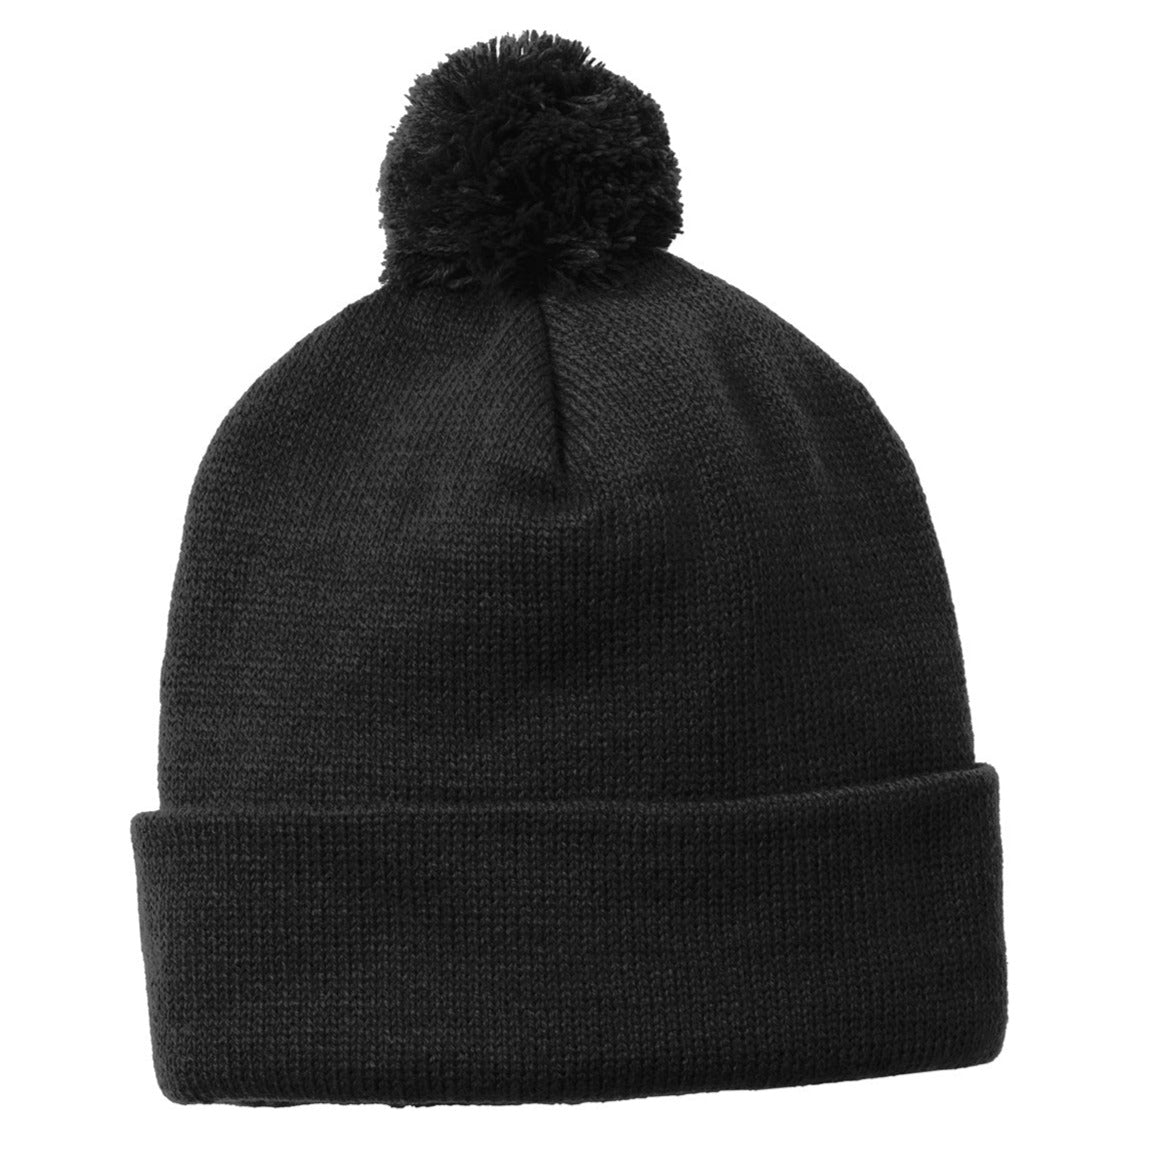 12 Pom Stocking Hat with Leather Patch